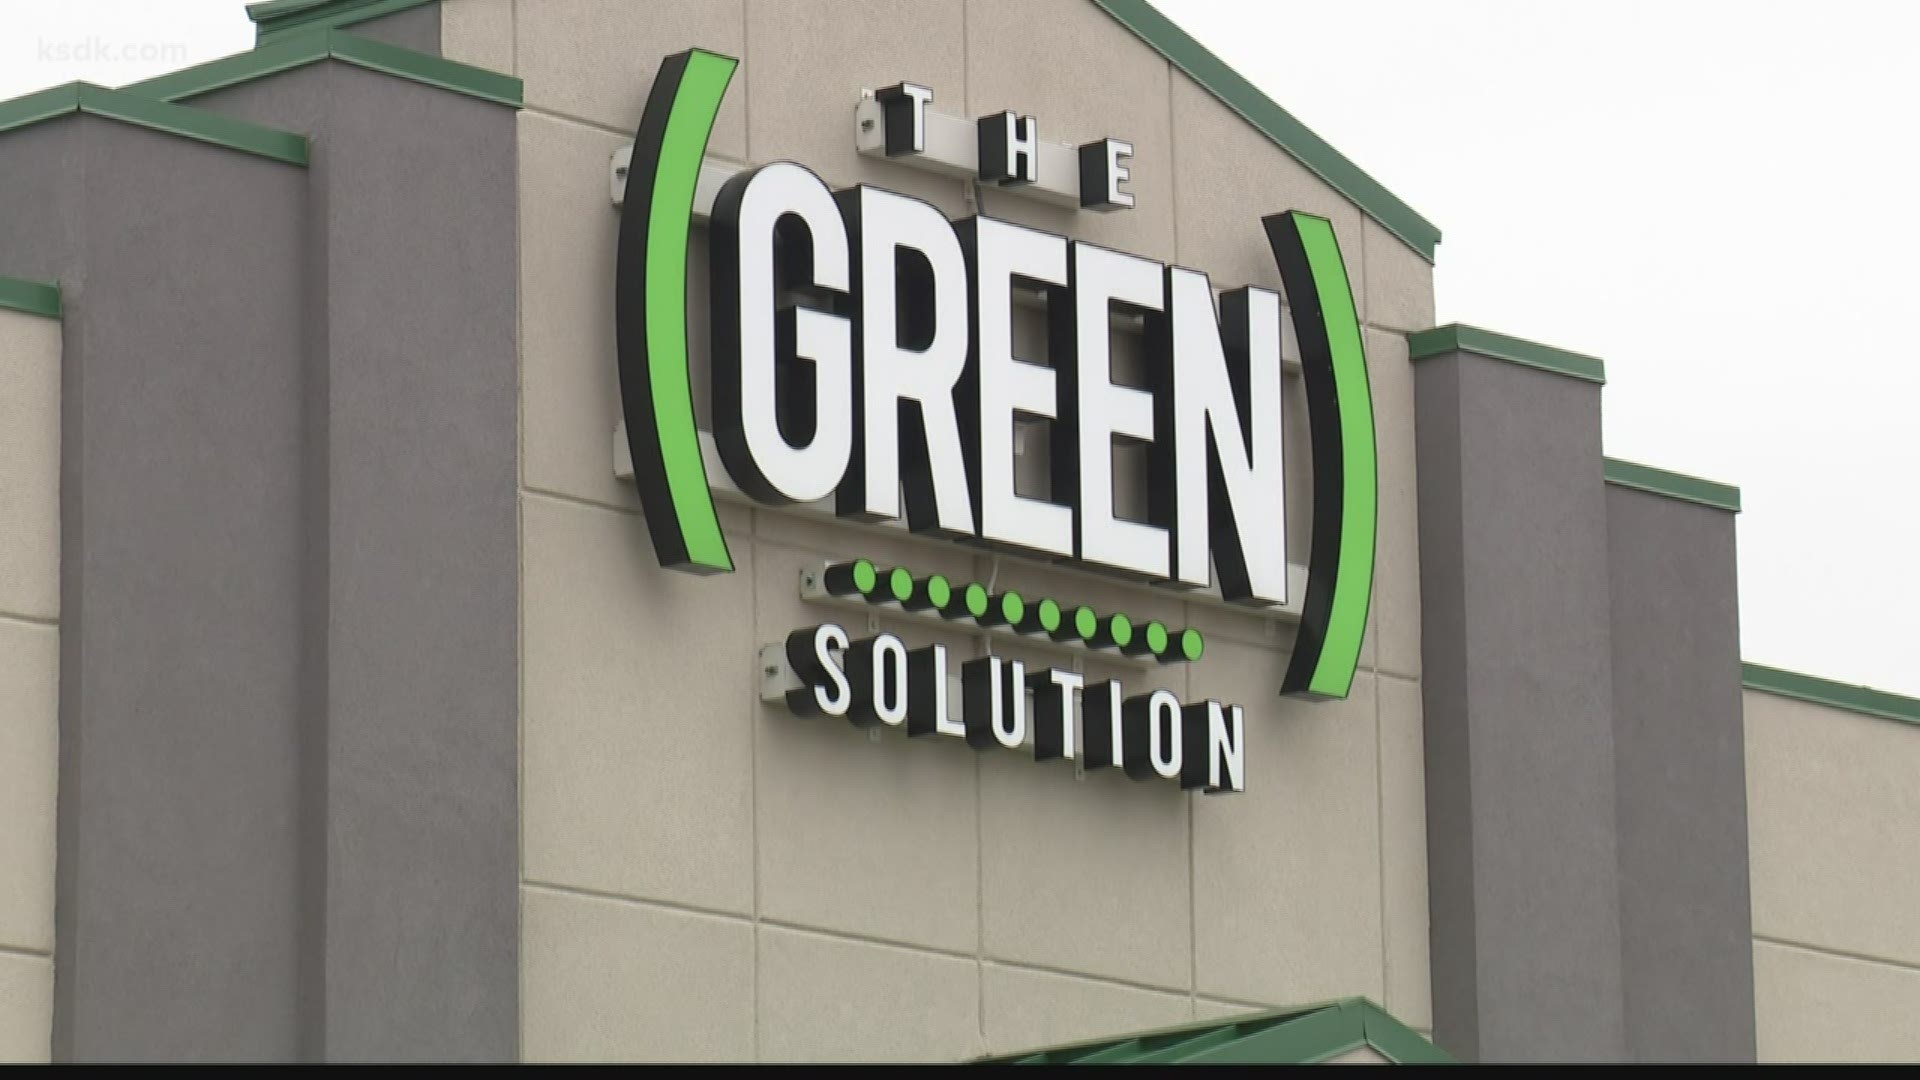 The license will allow The Green Solution in Sauget, an existing medical cannabis dispensary, to get an adult use dispensing license